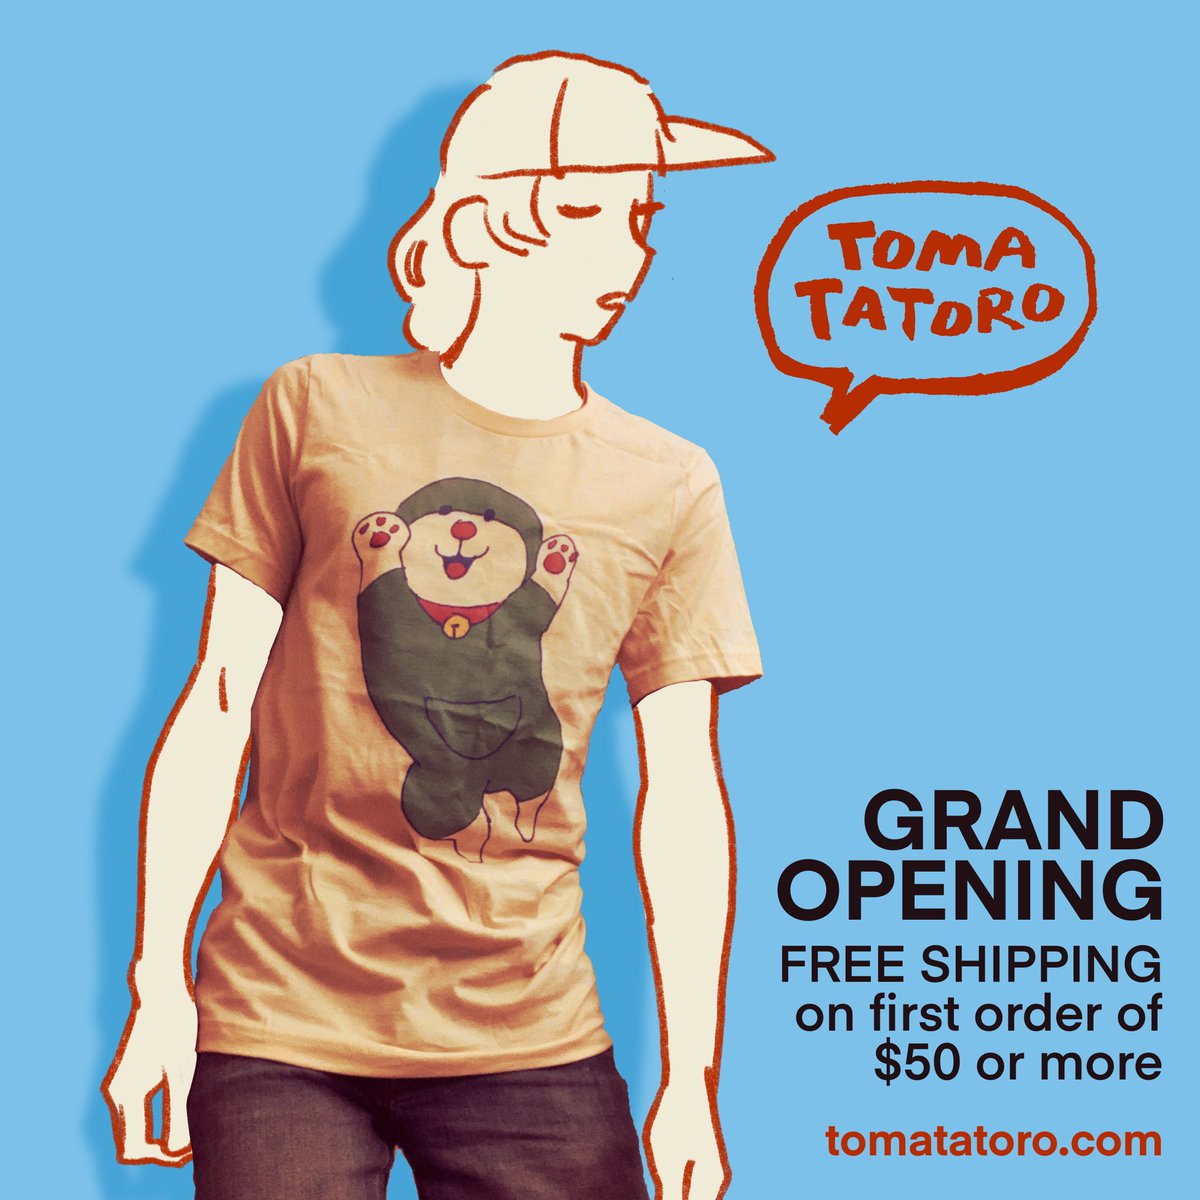 GRAND OPENING
Happy to announce the opening of my online store! There will be FREE SHIPPING on your first order of $50 or more!
https://t.co/0kwdCrKFyW 